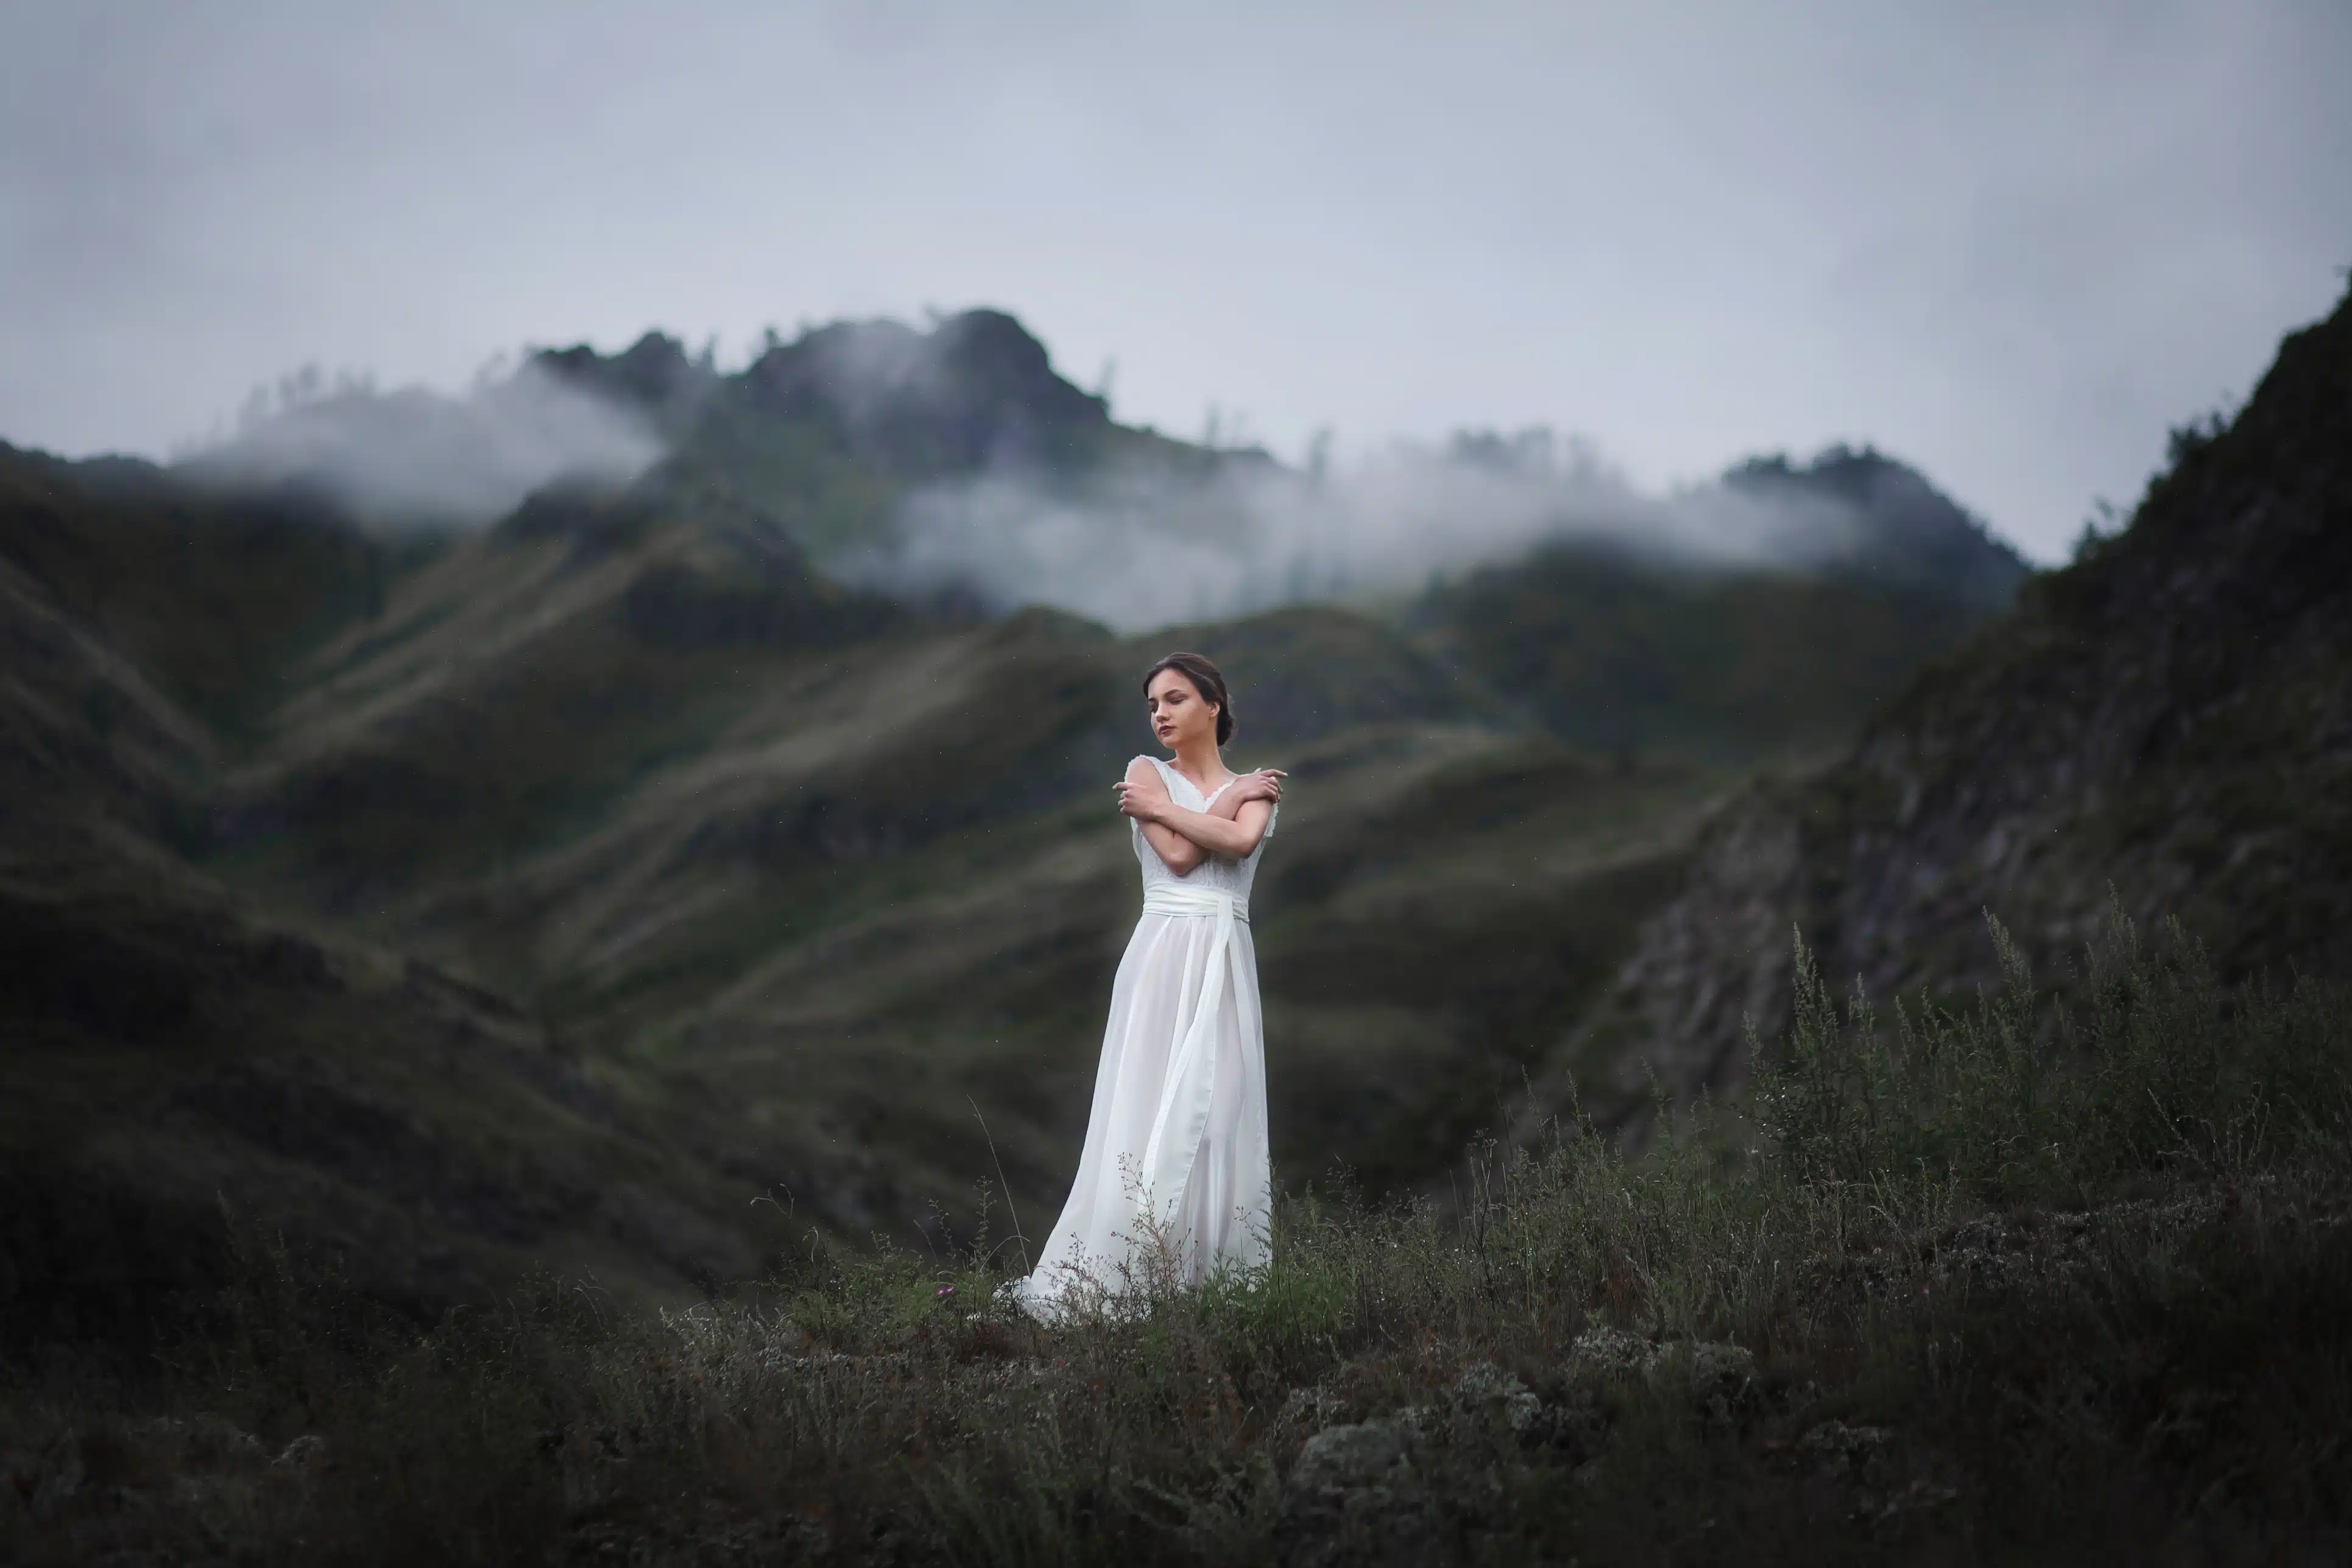 beautiful girl in a white dress walks in a foggy forest